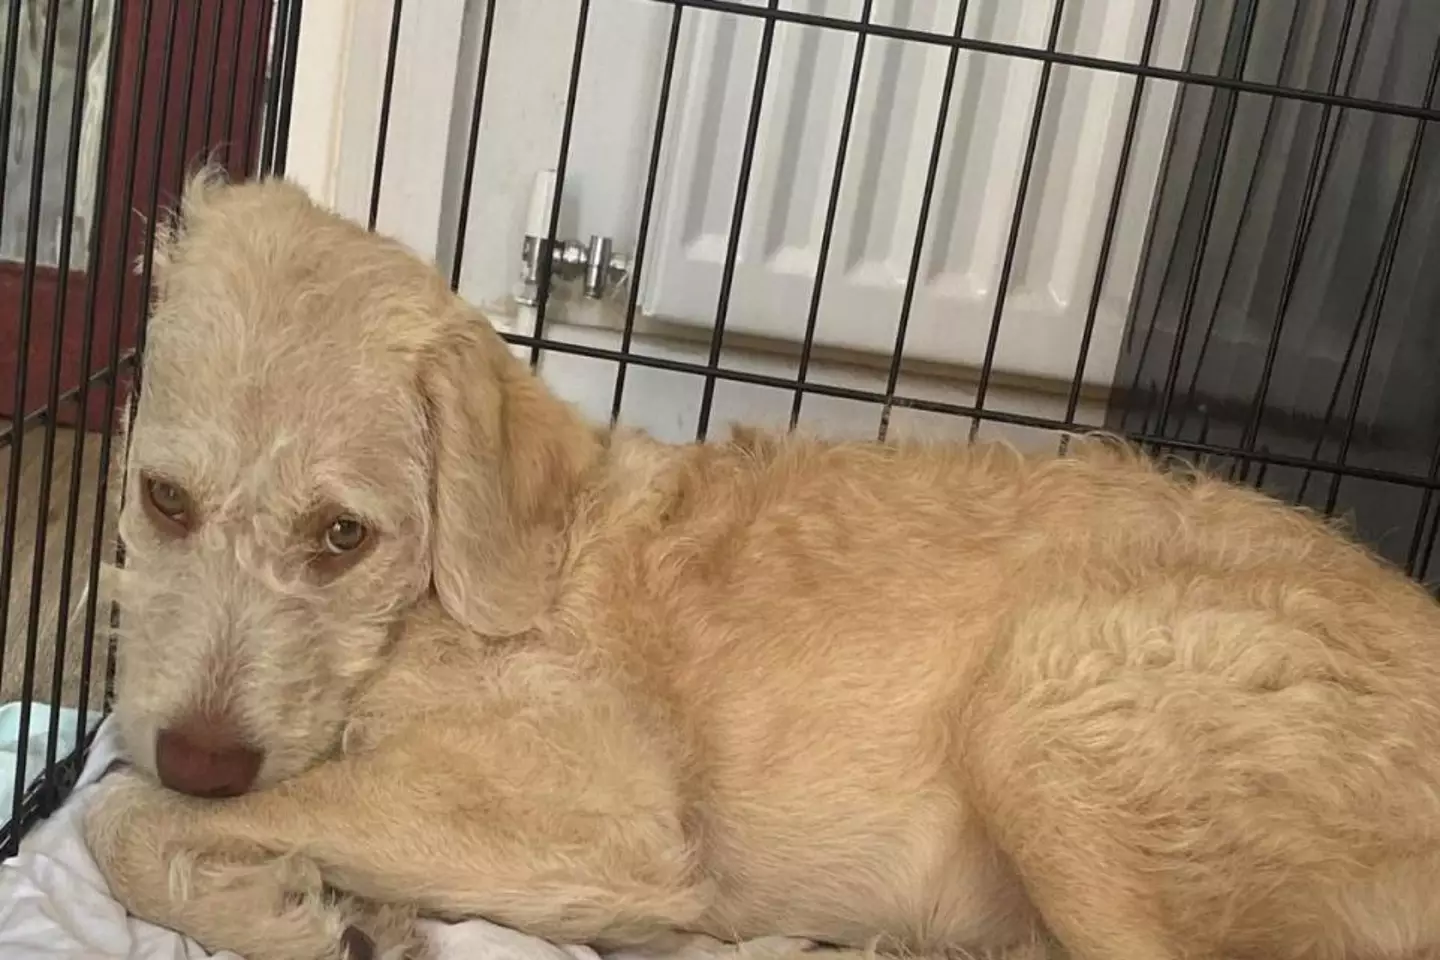 A woman has issued a plea to dog owners after her beloved puppy caught a deadly virus.